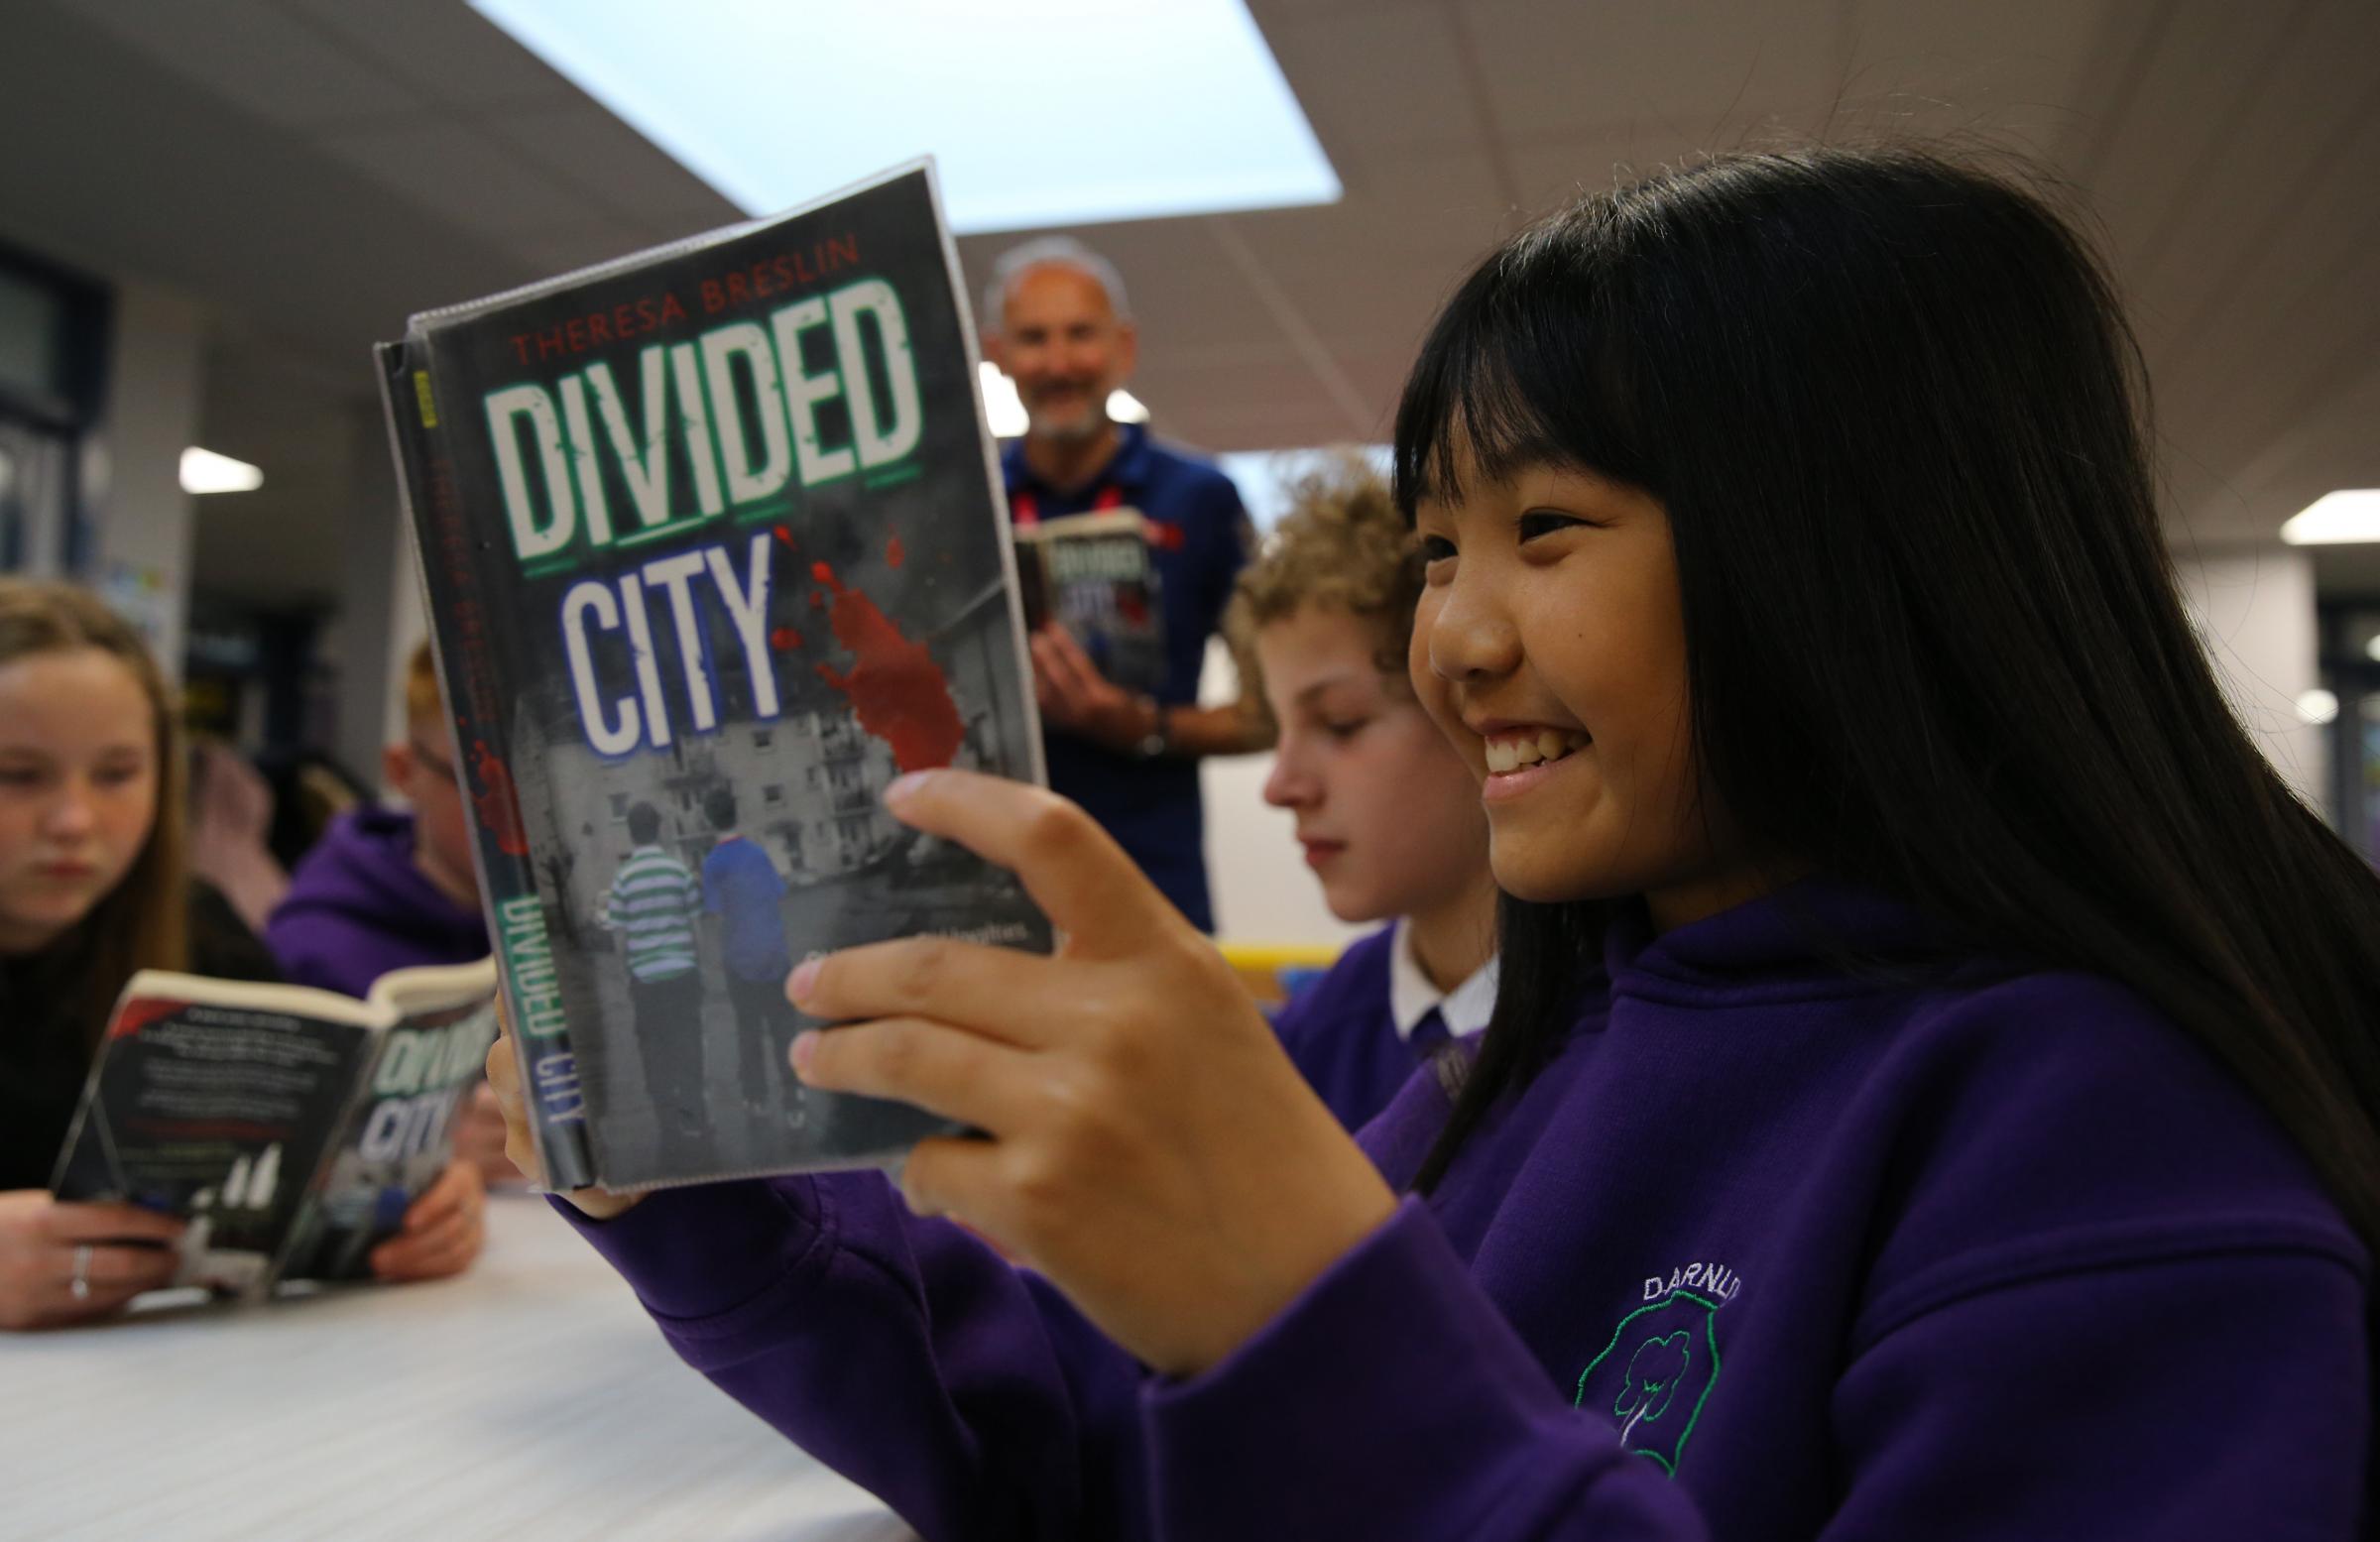 Darnley Primary school P pupil Constant Tho age 11 with a copy of Divided City by Theresa Breslin Picture: Colin Mearns